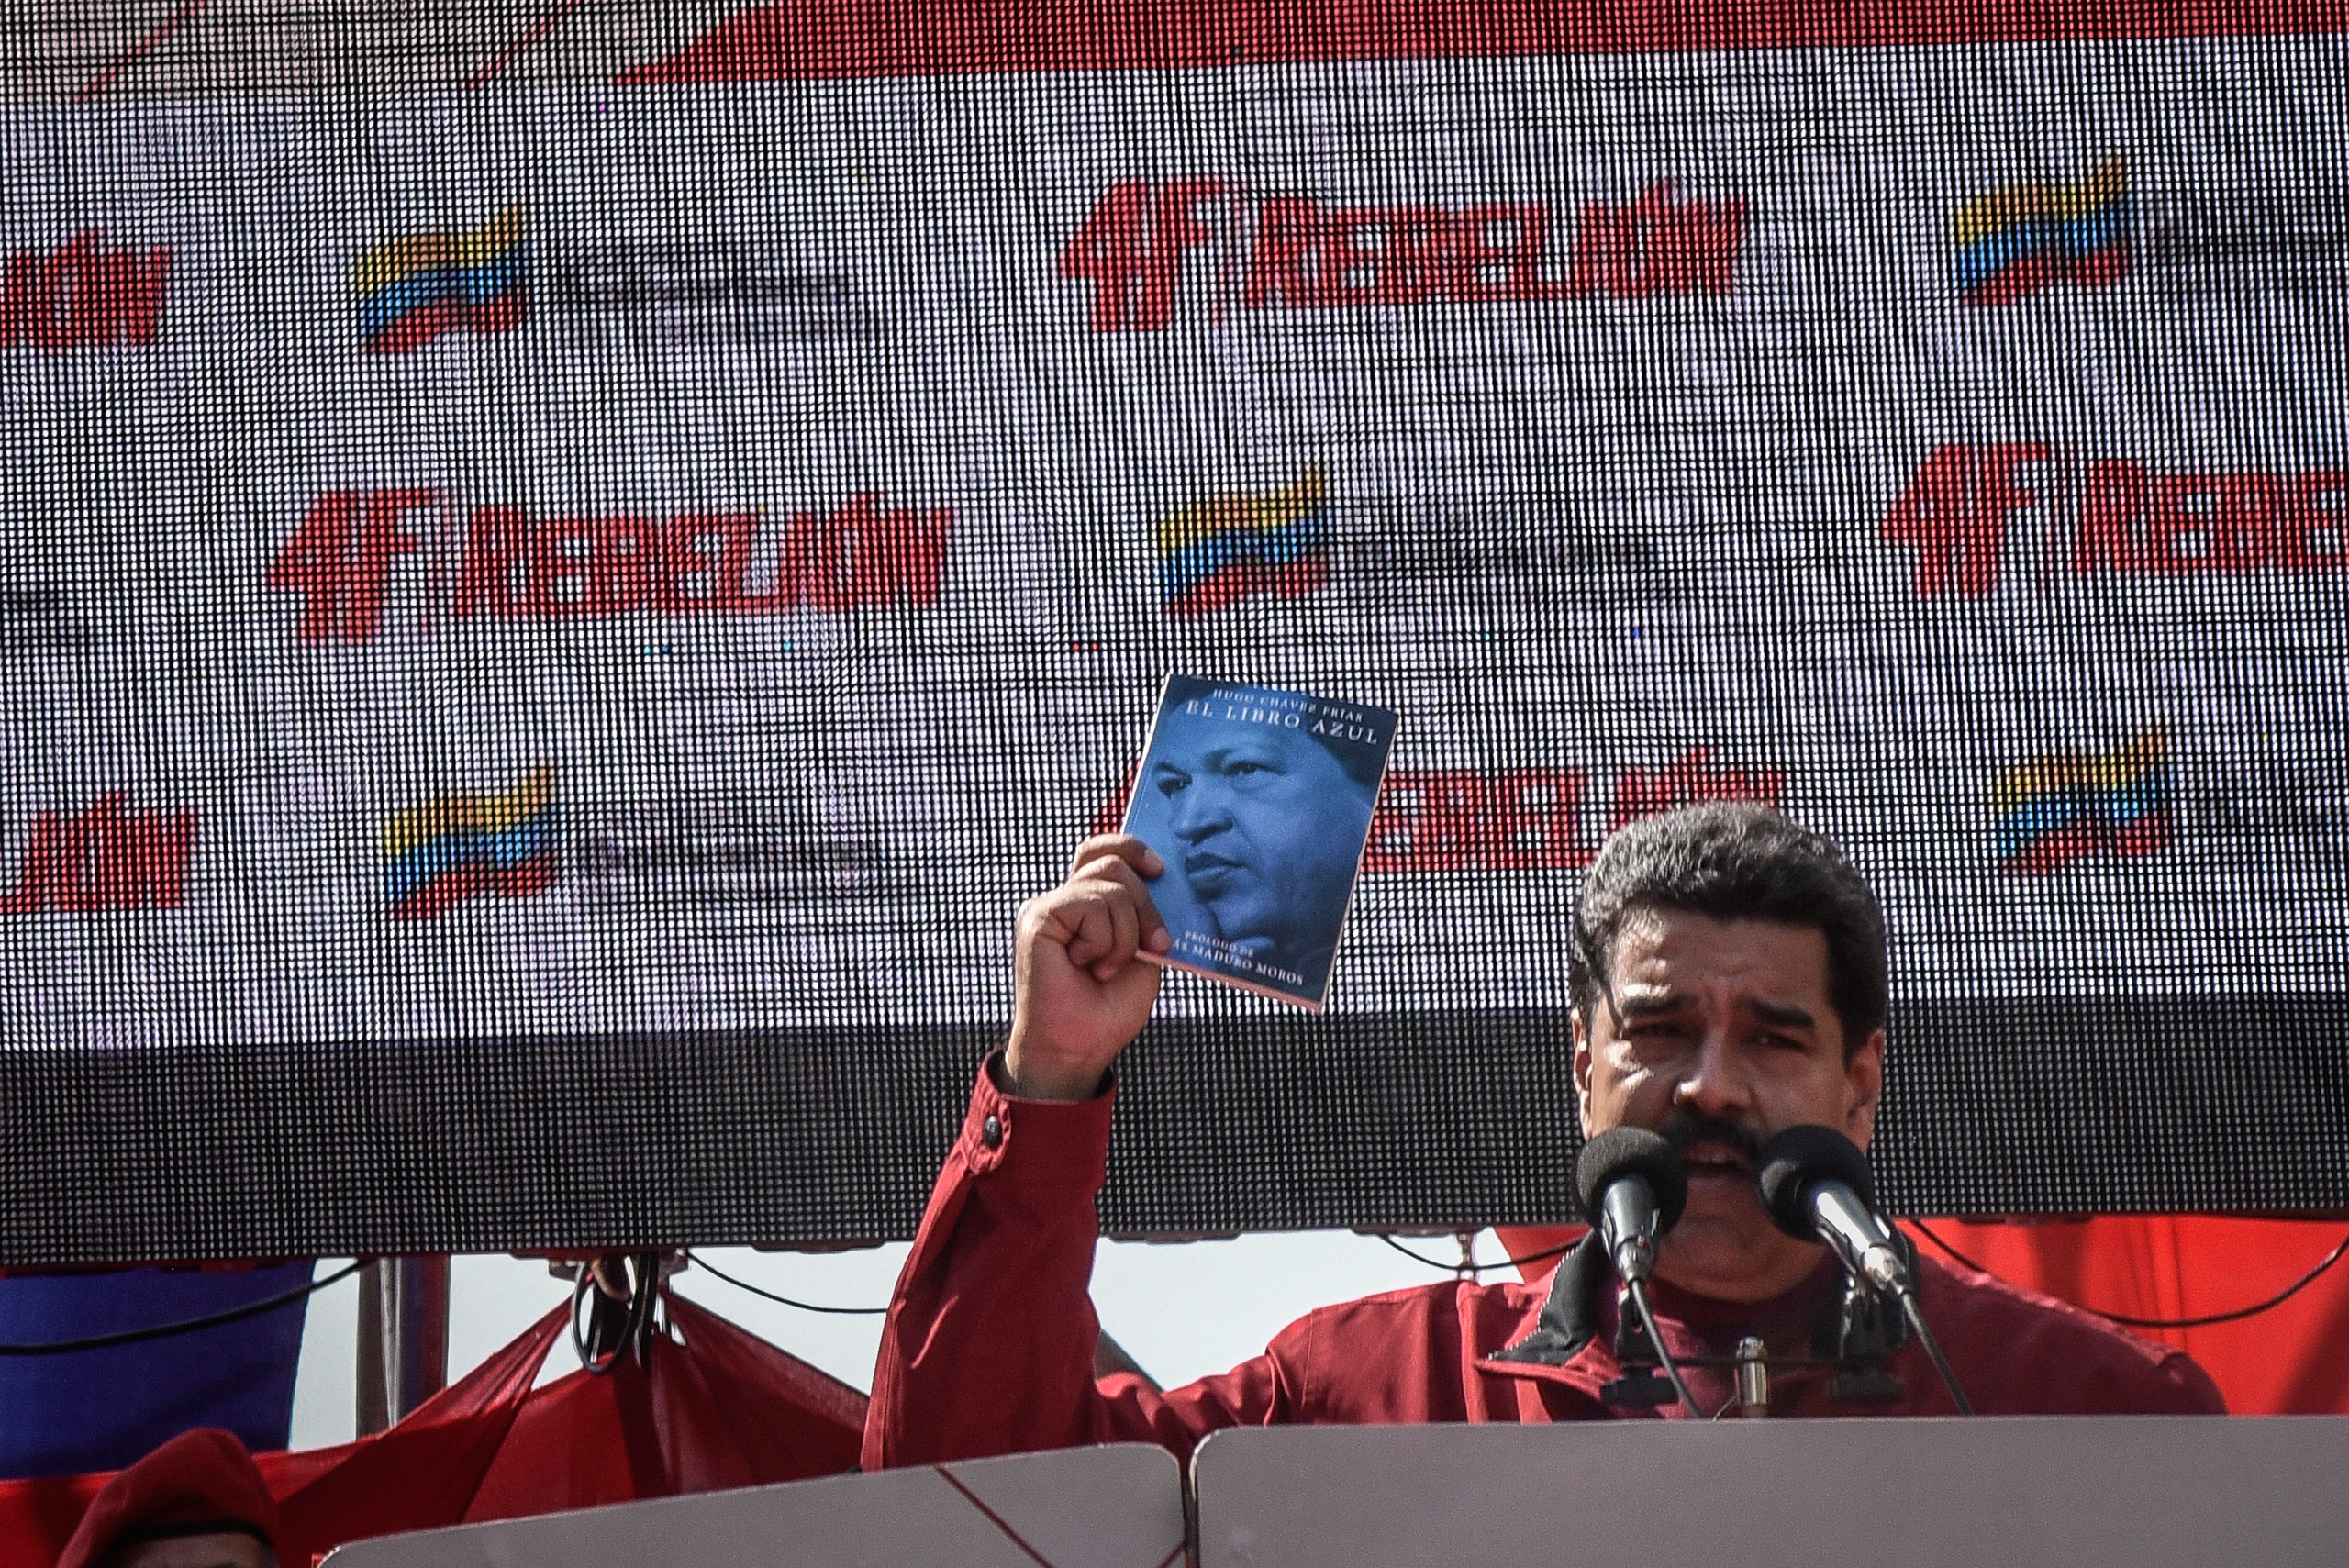 President Nicolas Maduro Speaks To Supporters At Rally